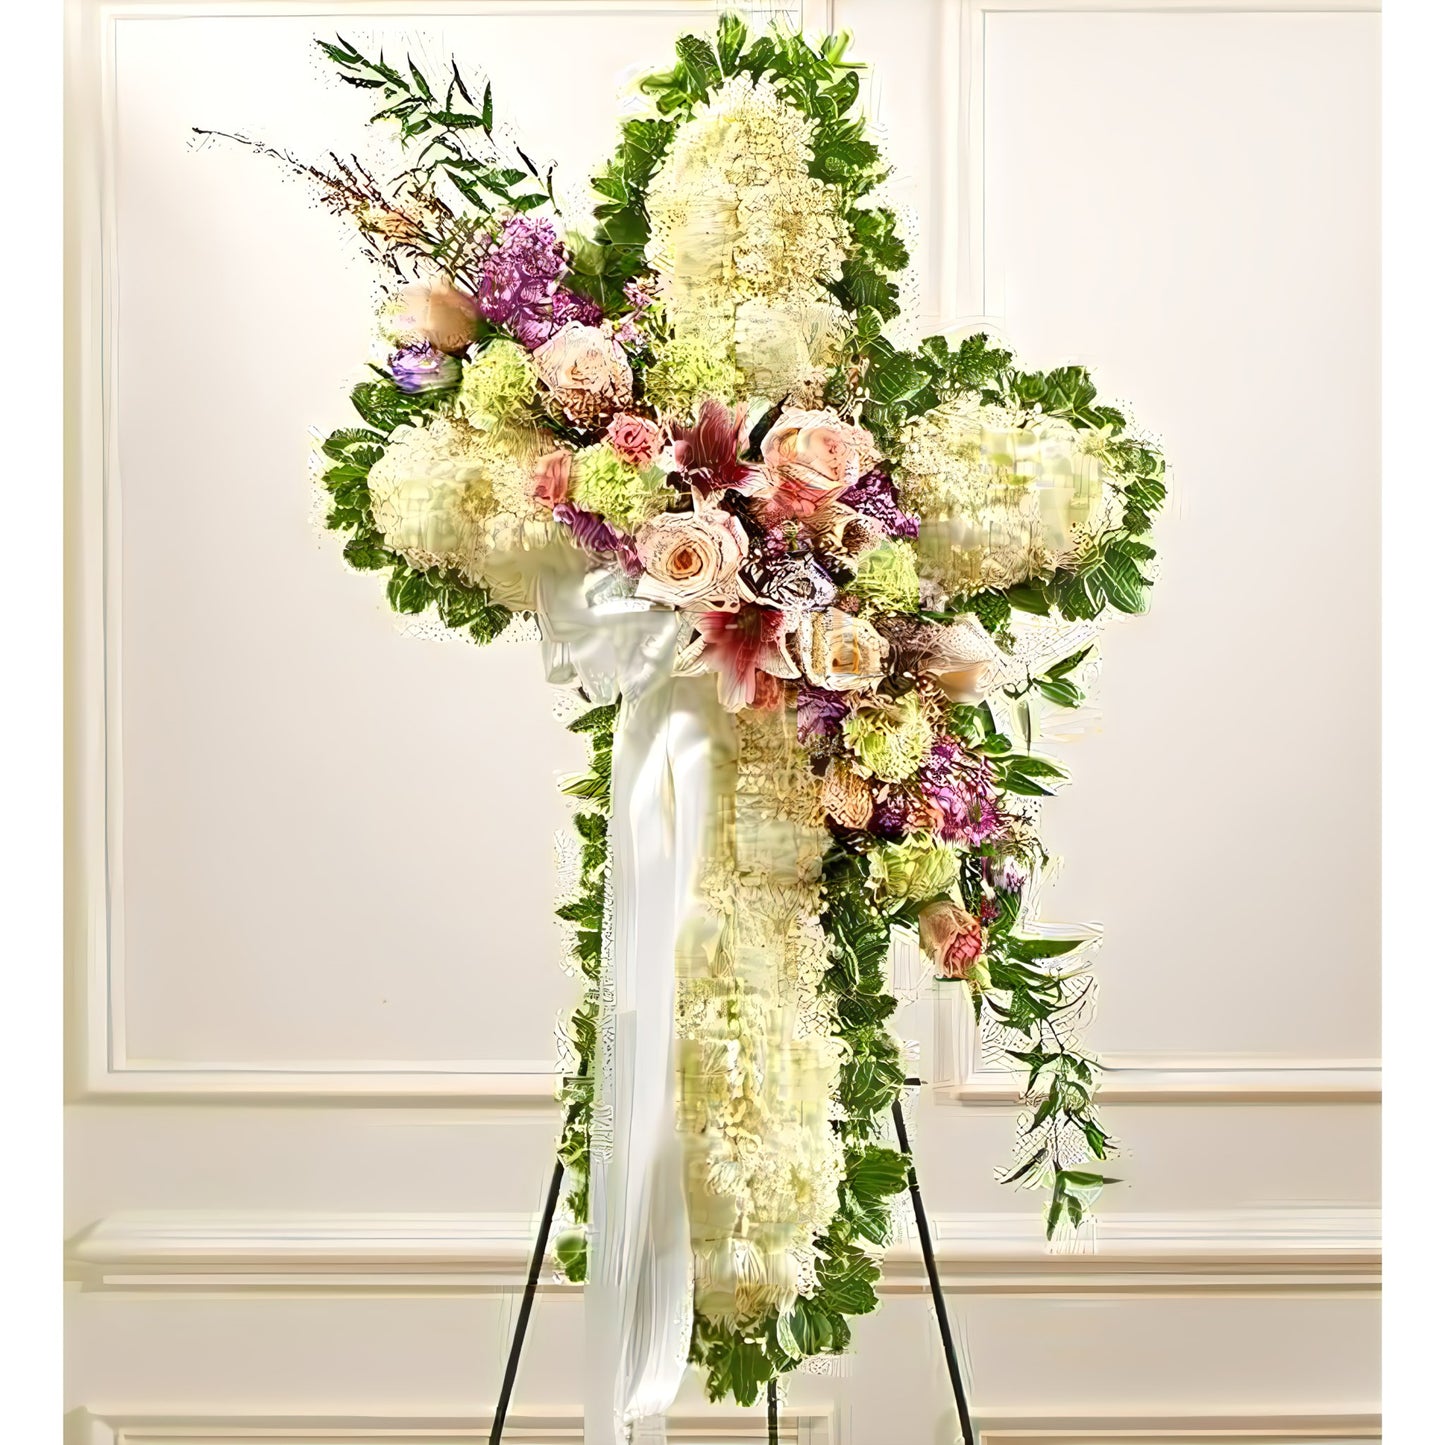 Peace and Prayers Standing Cross - Pastel - Floral Arrangement - Flower Delivery Brooklyn